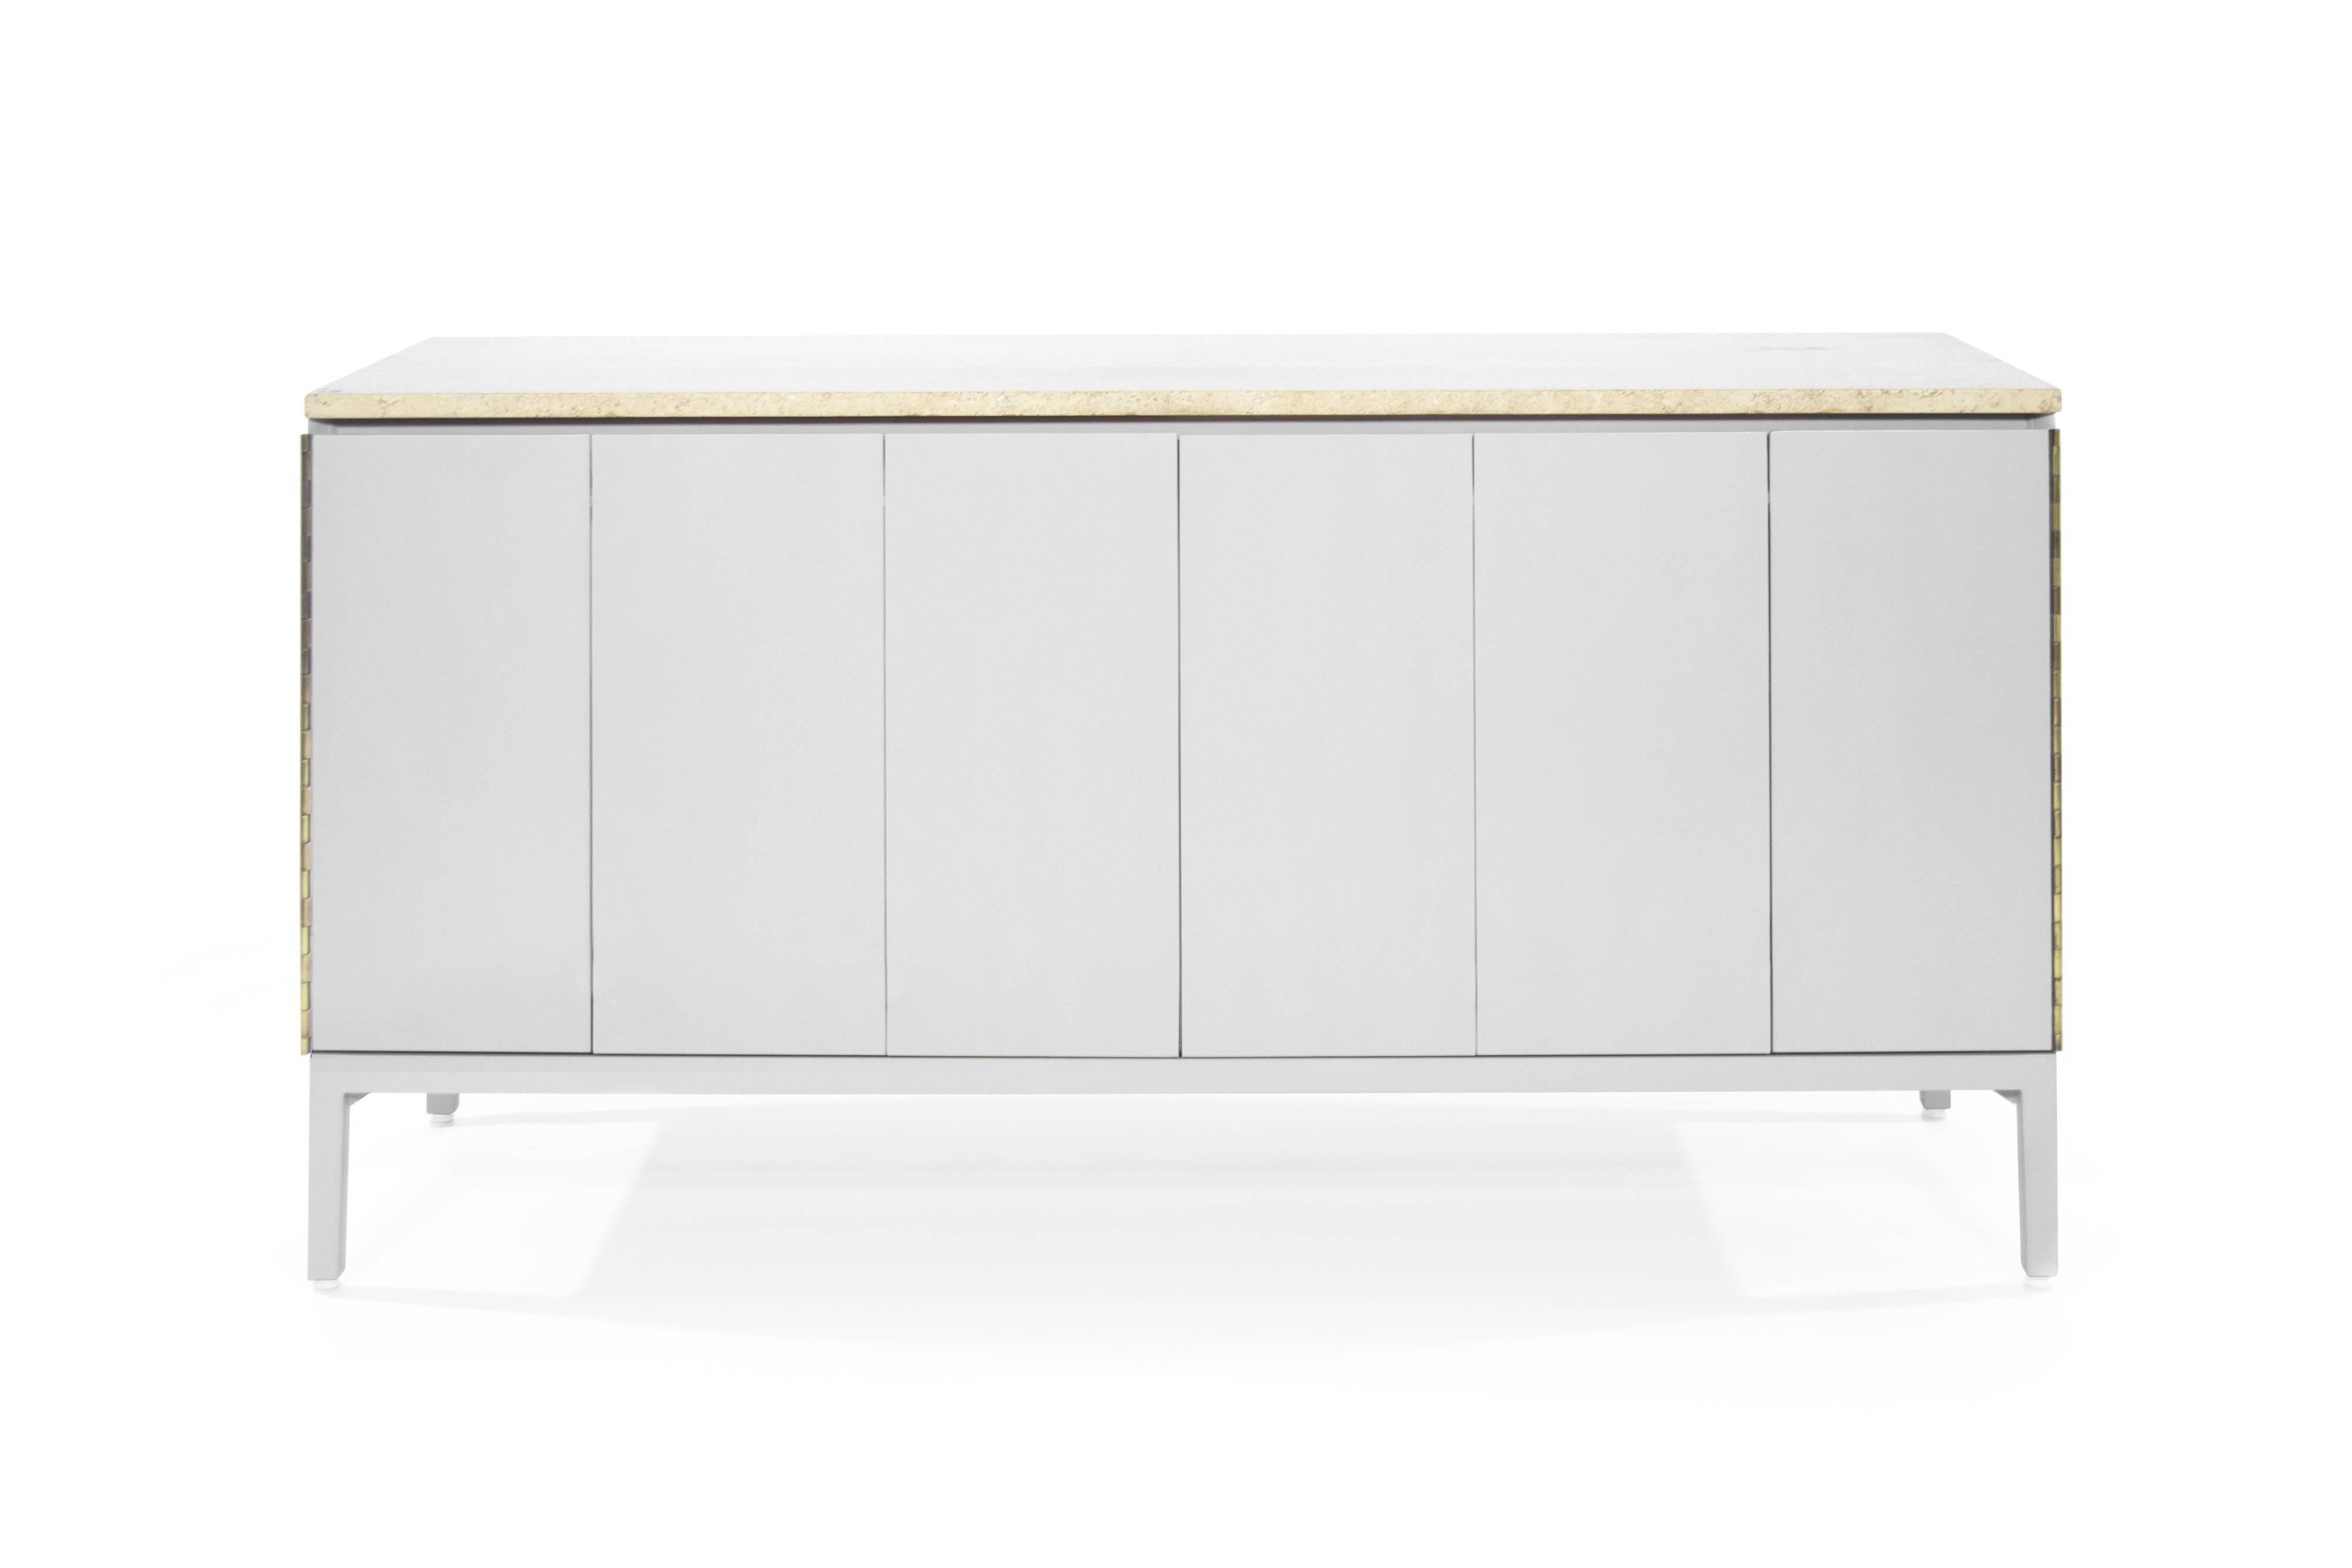 A dresser by iconic furniture designer Paul McCobb. Exquisitely redone in light grey, this dresser features tri-fold doors which open up to reveal eight drawers, providing ample storage space. Original travertine top has been newly polished.